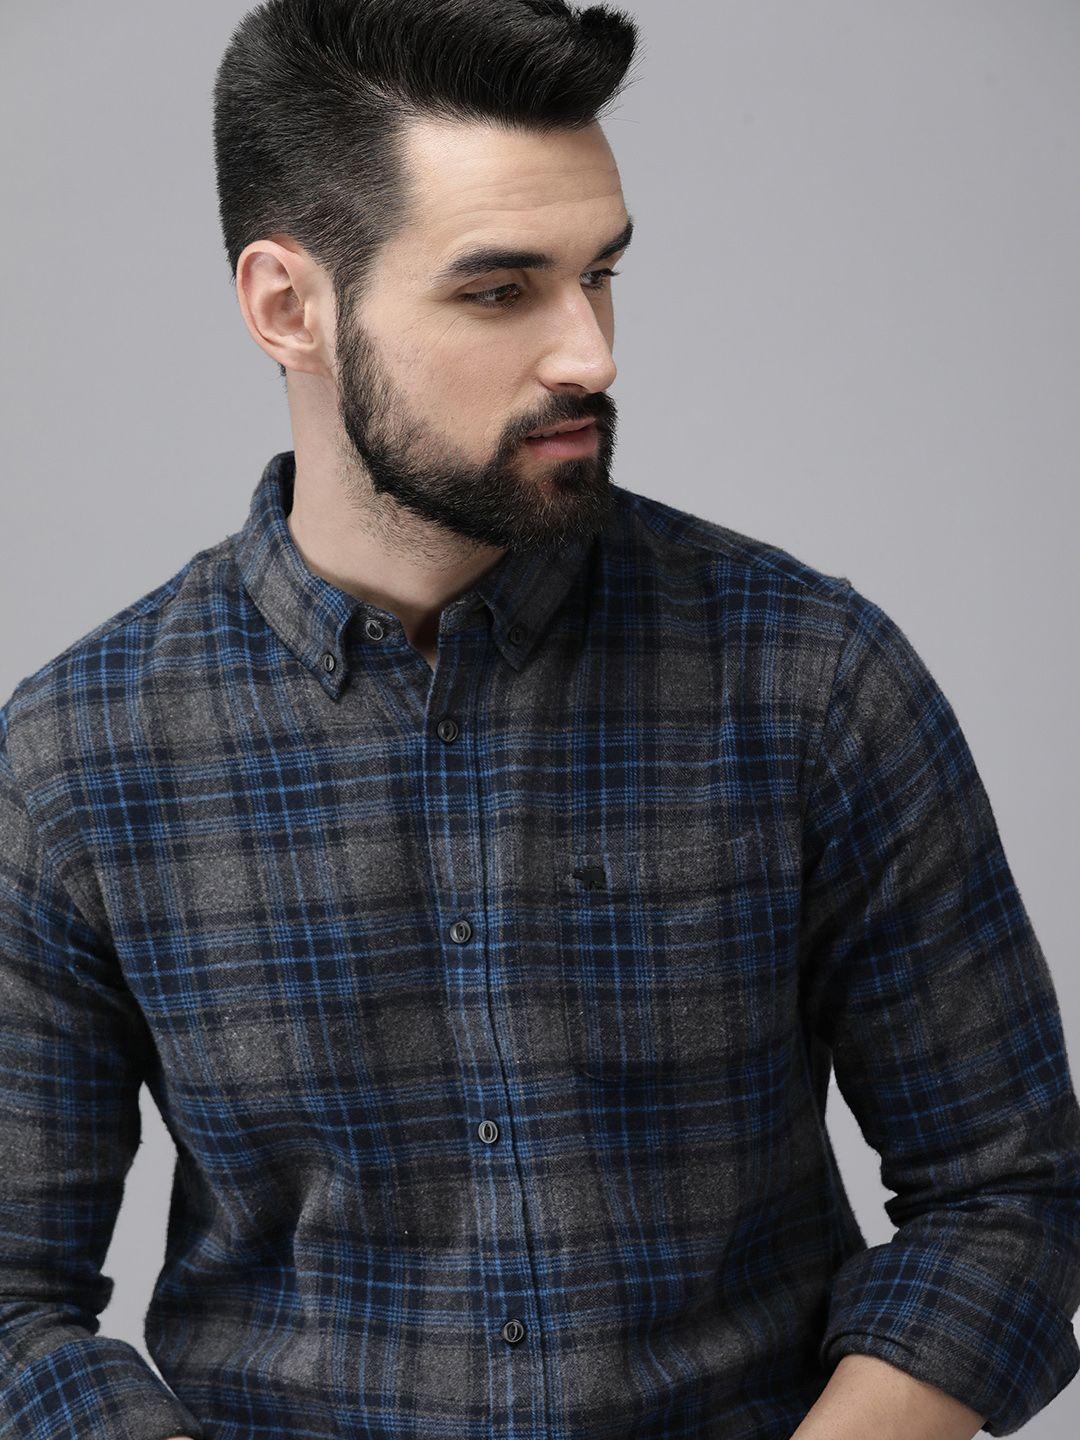 the-bear-house-men-charcoal-grey-&-blue-slim-fit-checked-flannel-cotton-shirt